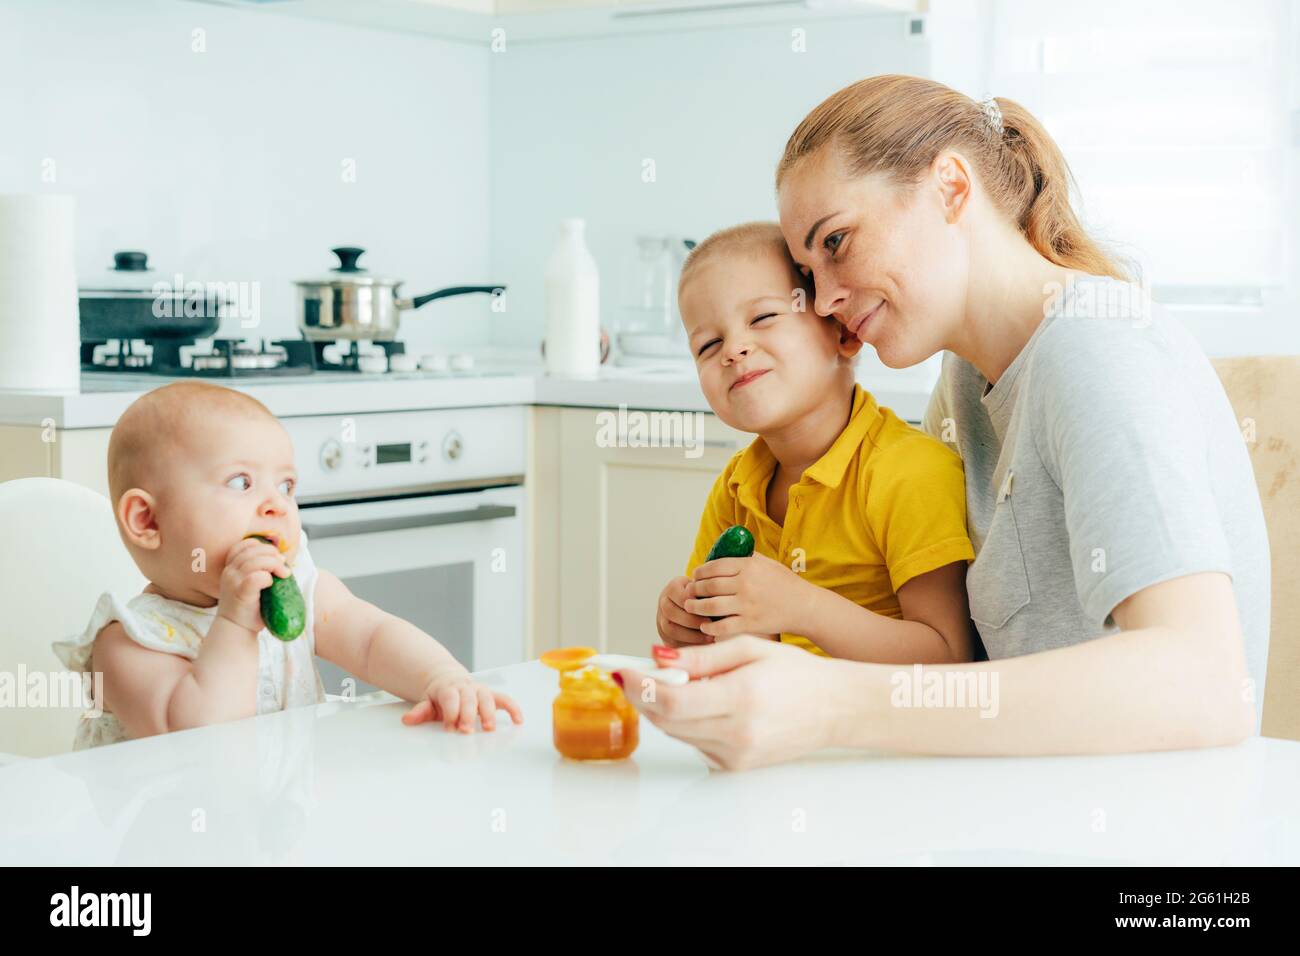 Candid family is at home in the kitchen, mom feeds the baby sitting in a chair, the eldest son sits on mom's lap and hugs her. Stock Photo